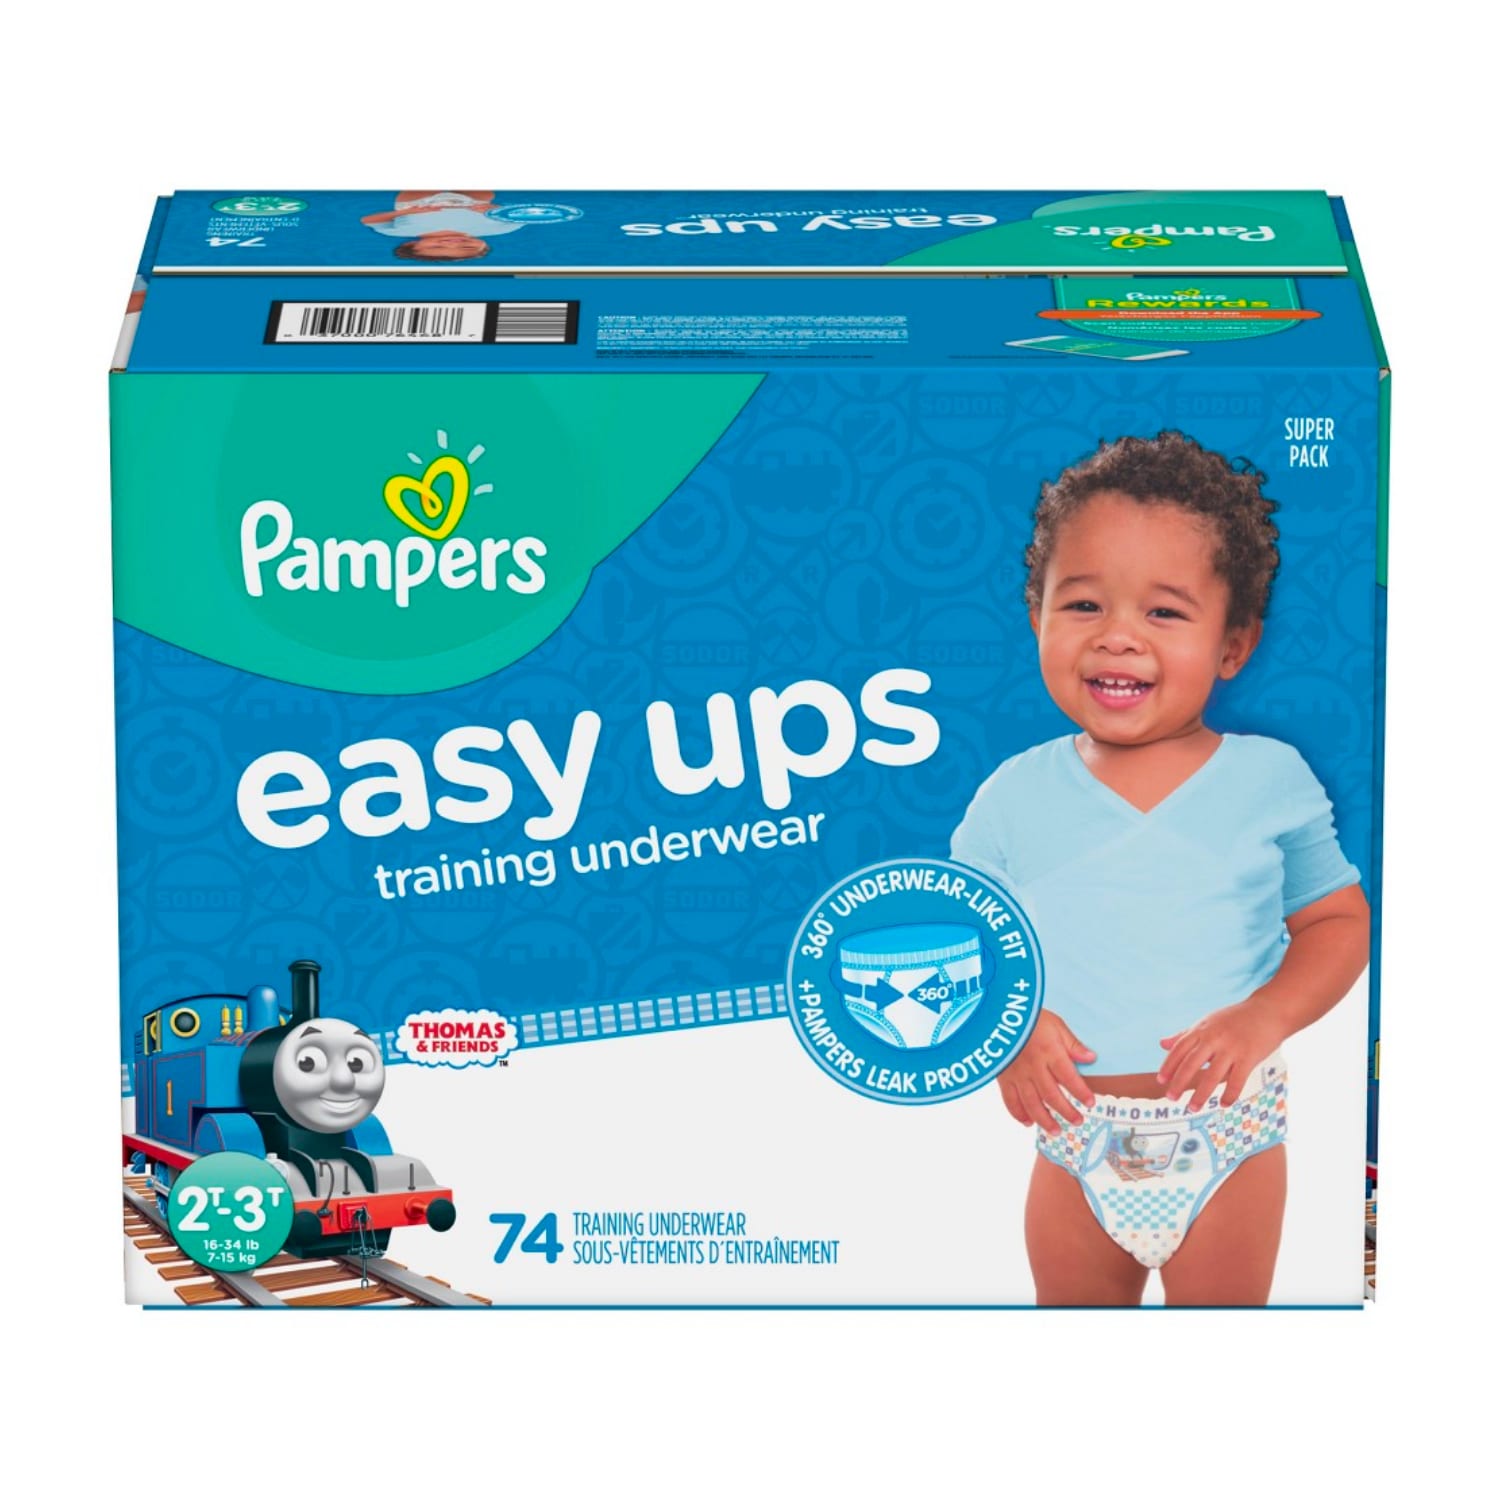 Pampers Easy Ups Training Underwear for Boys (Size 2T-3T, 74 Count) - MedaKi